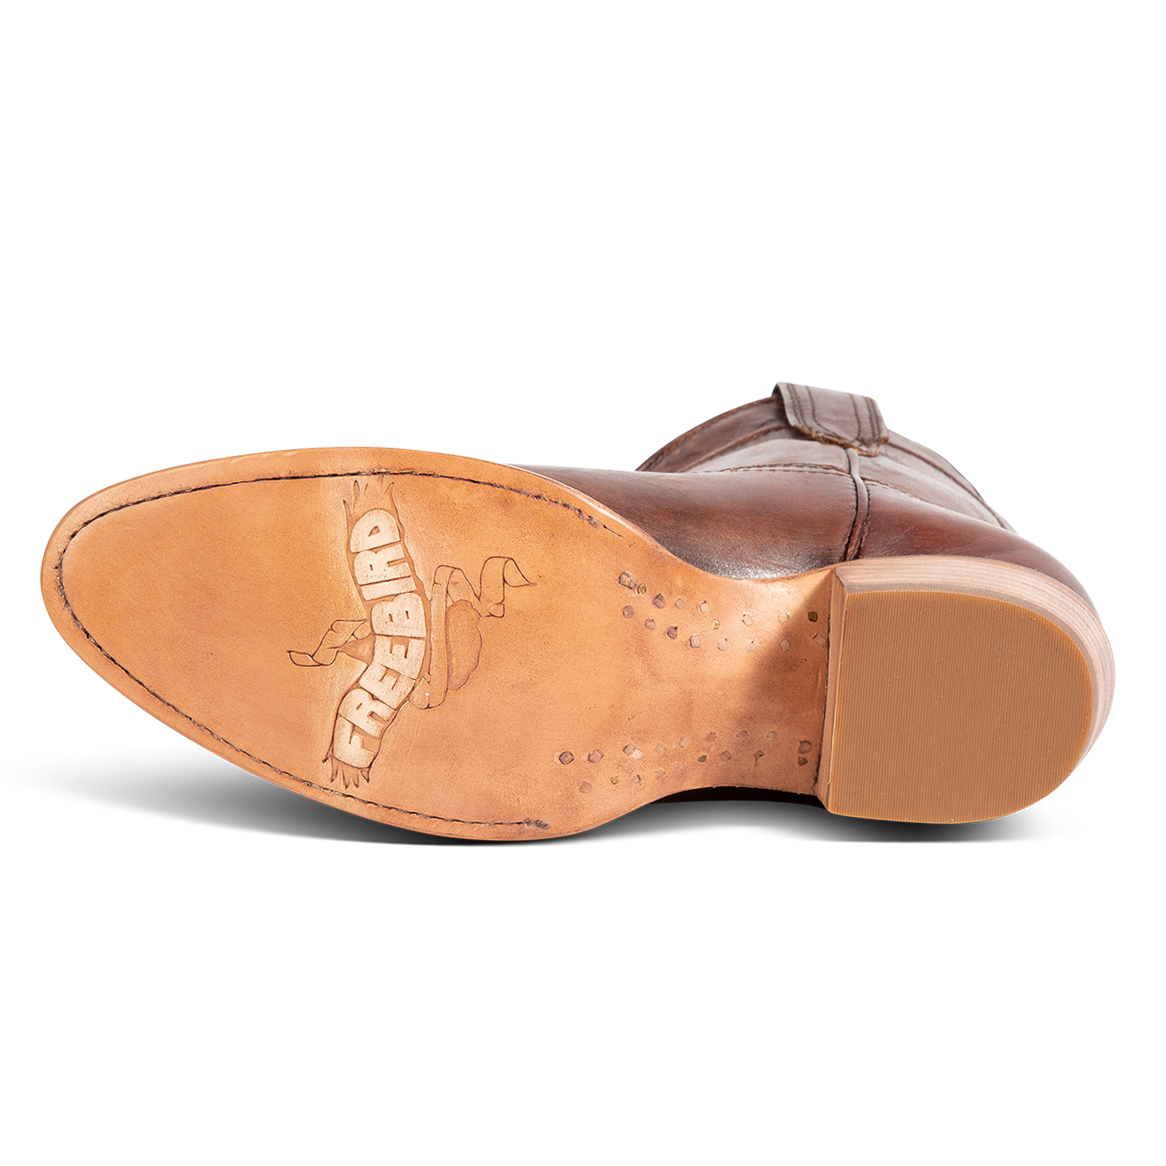 Leather sole imprinted with FREEBIRD on women's Zamora cognac leather bootie